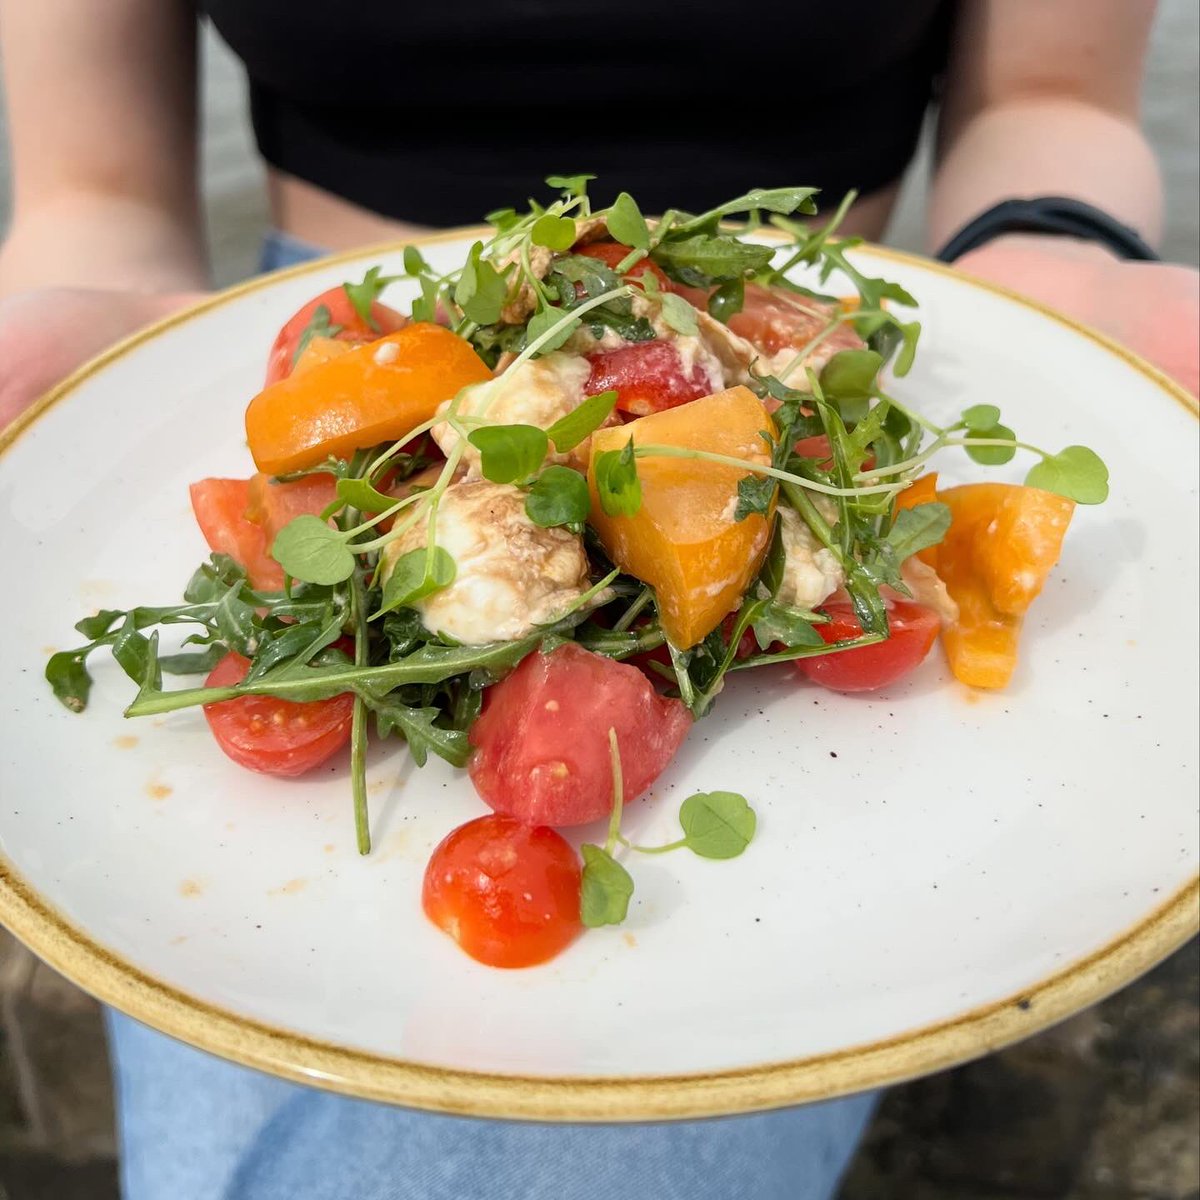 Our new Nutbourne and mozzarella salad - just in time for Fresh Tomato Day🤩🍅
•
•
•
#cuttysarkpub #youngspubs #tomatosalad #newstarter #summermenu